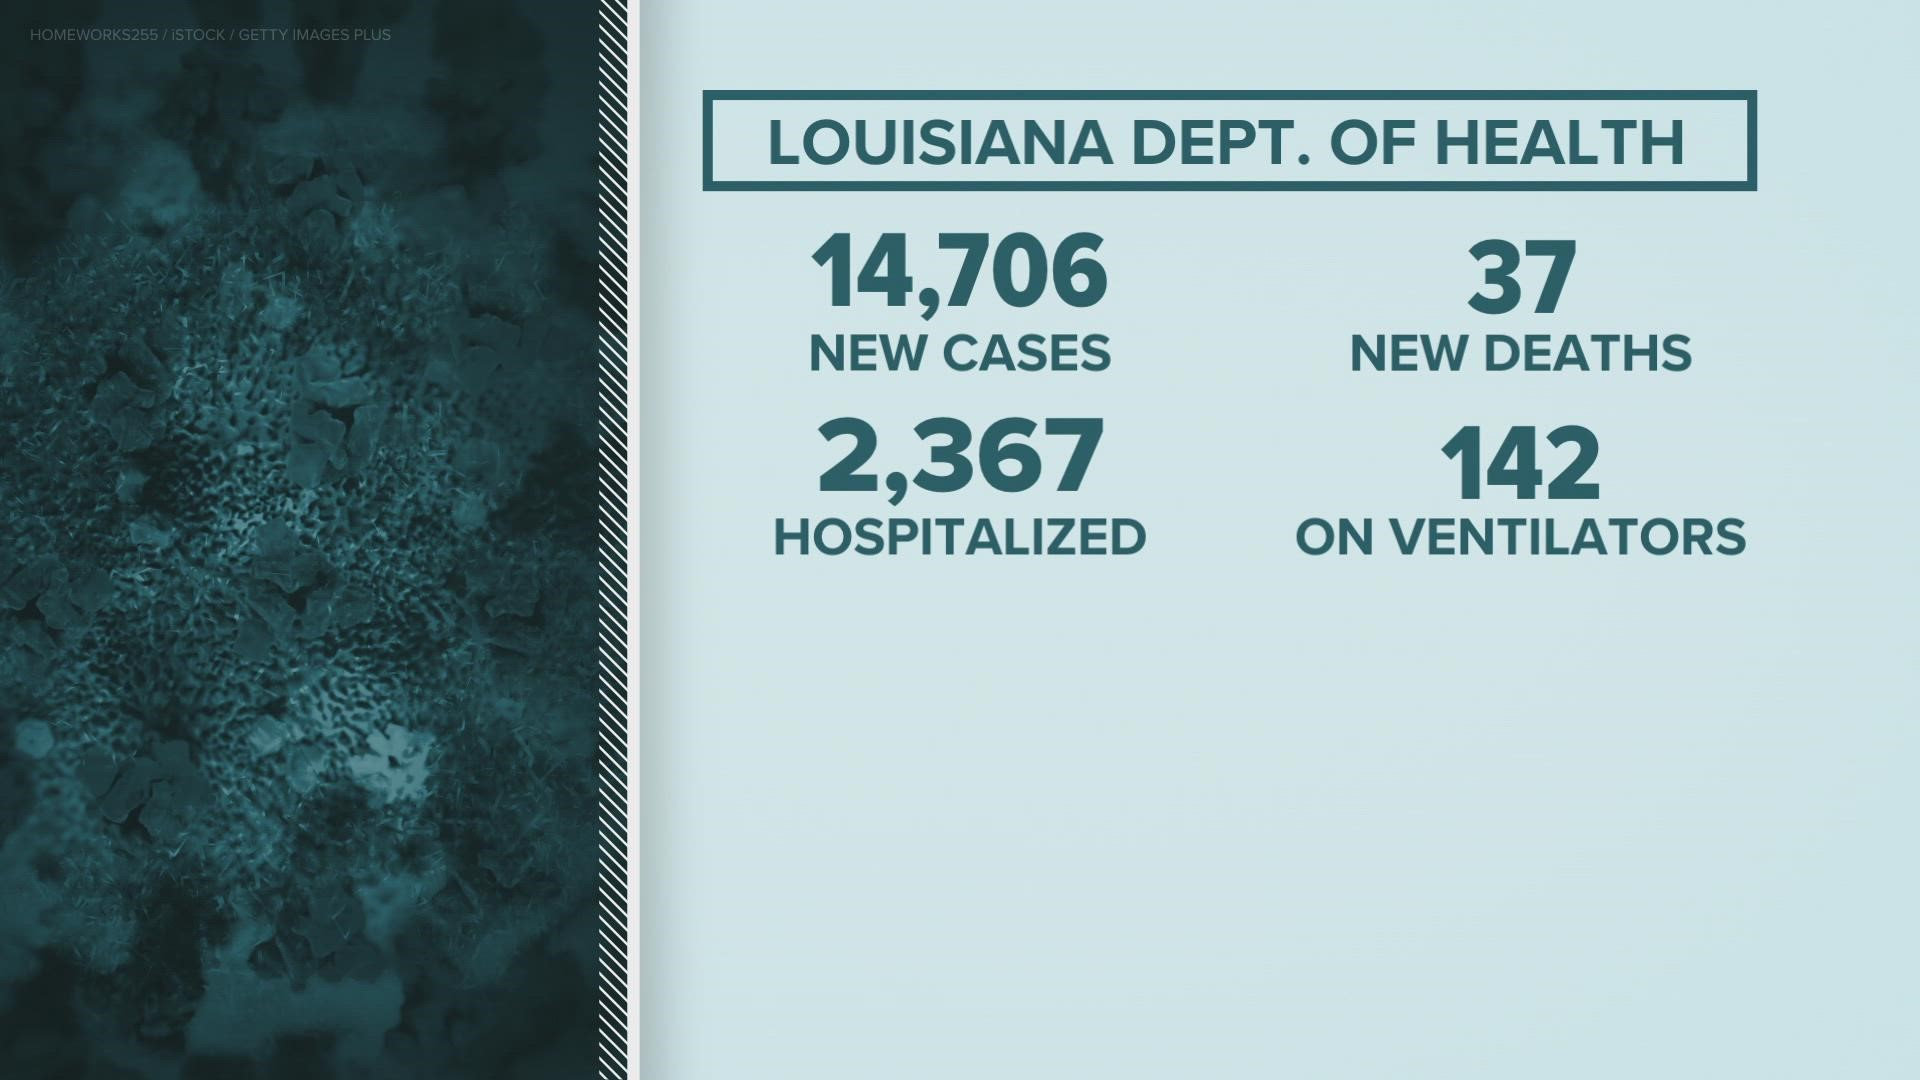 Over 2,300 hospitalizations were reported